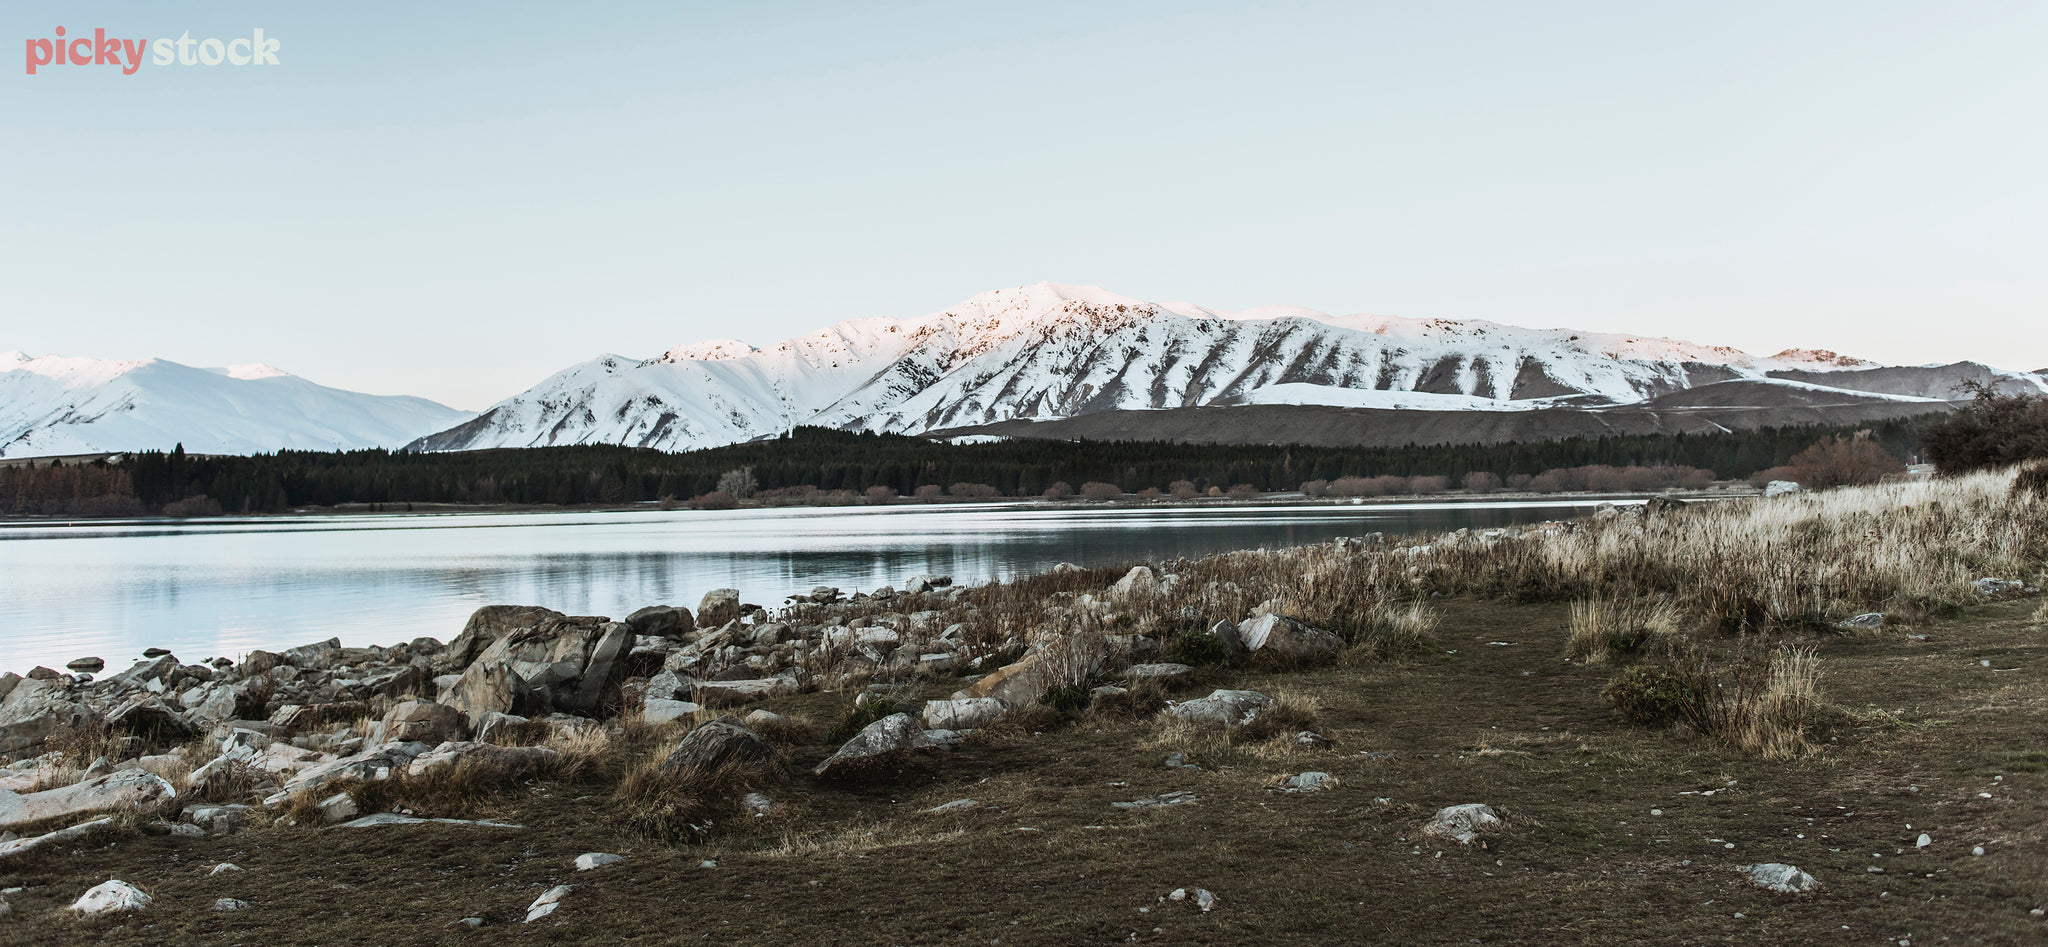 In early morning a dirt tussock bank runs down to a flat blue green lake. In the distance sits a snow covered mountain.